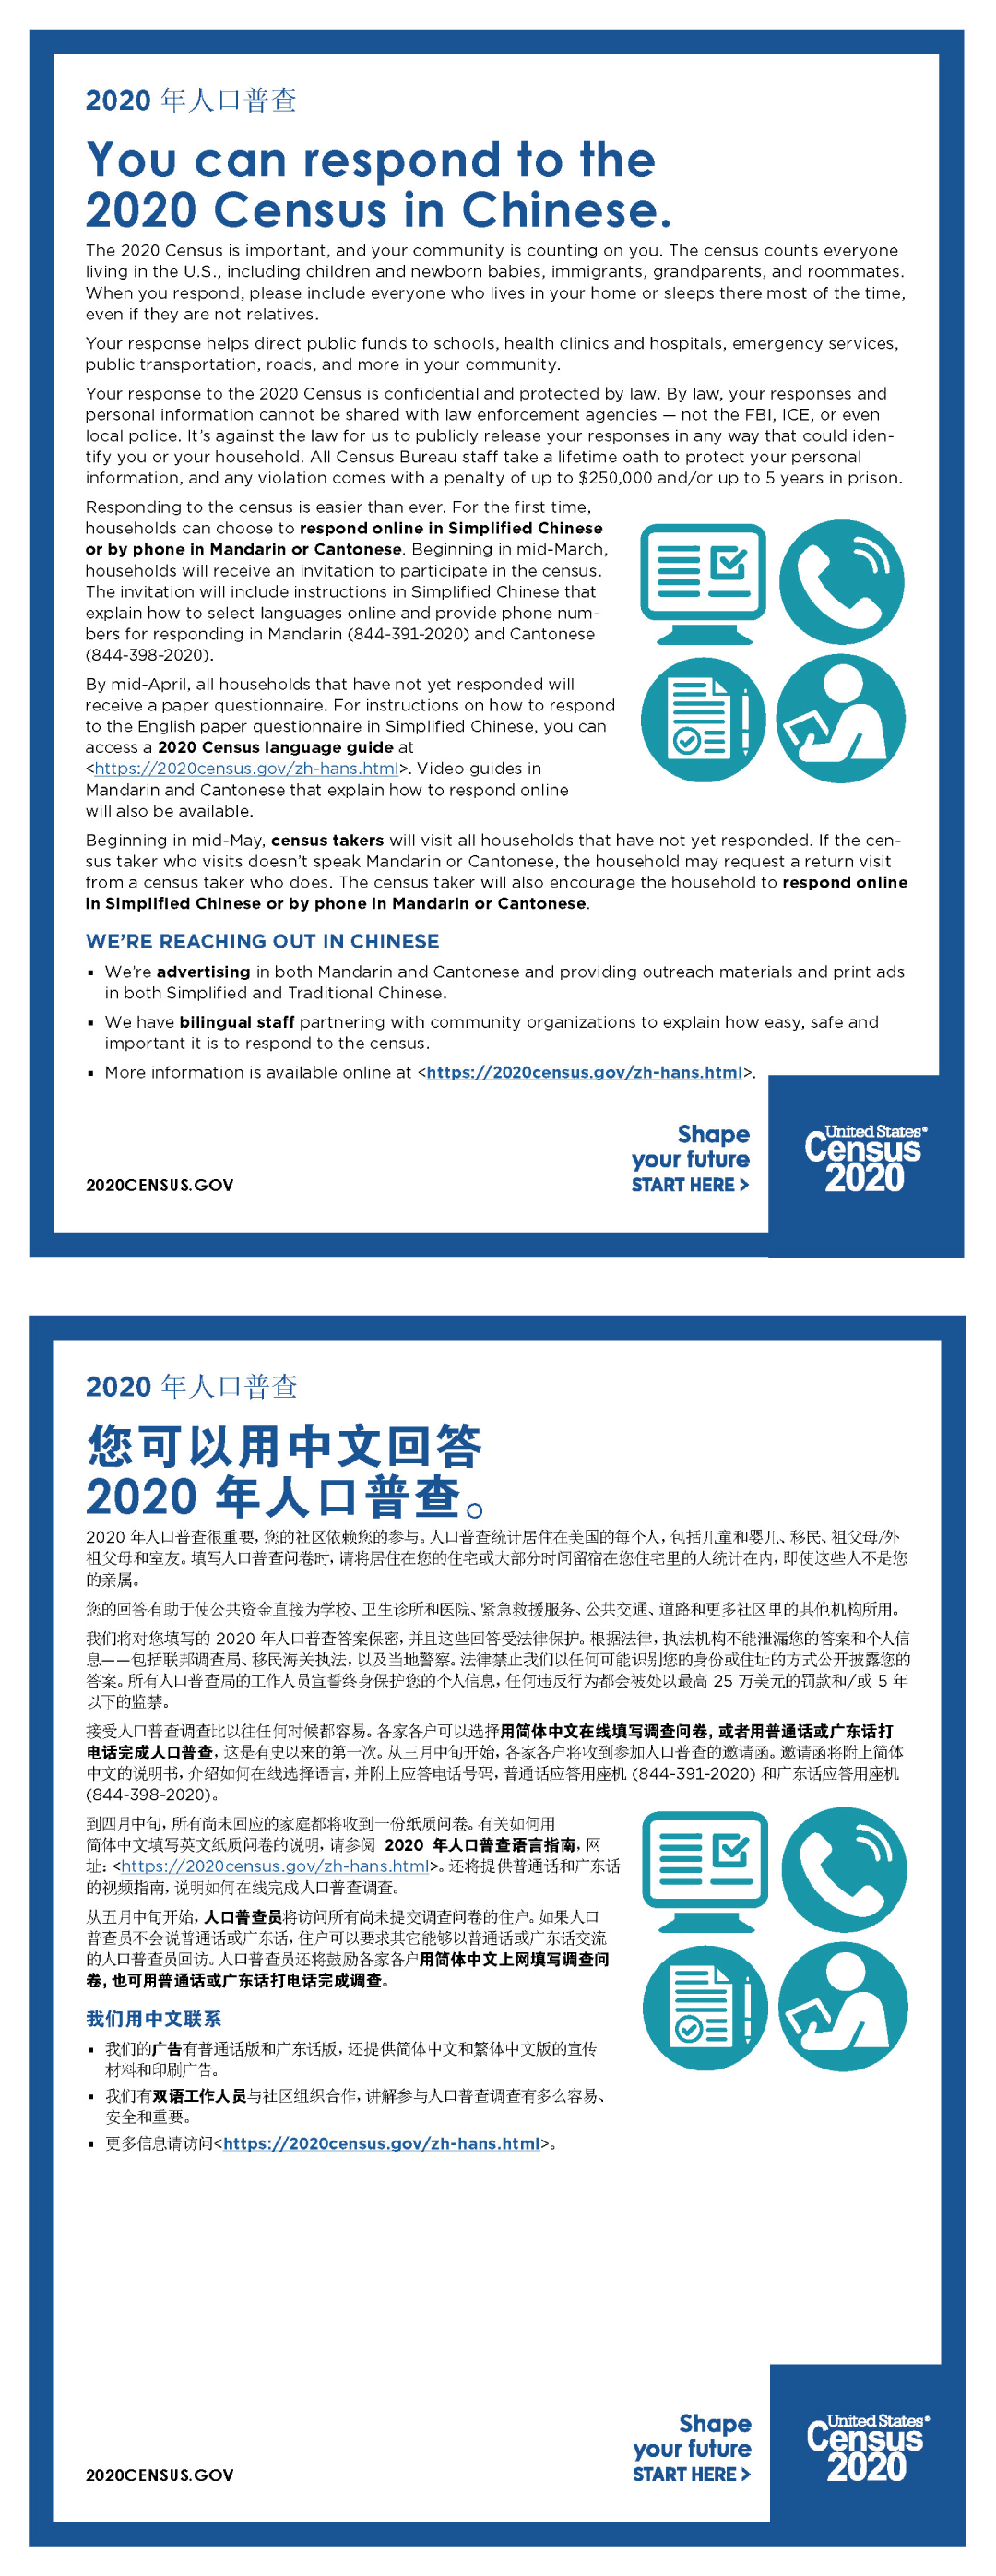 You can respond to the 2020 Census in Chinese. (您可以用中文回答 2020 年人口普查。)